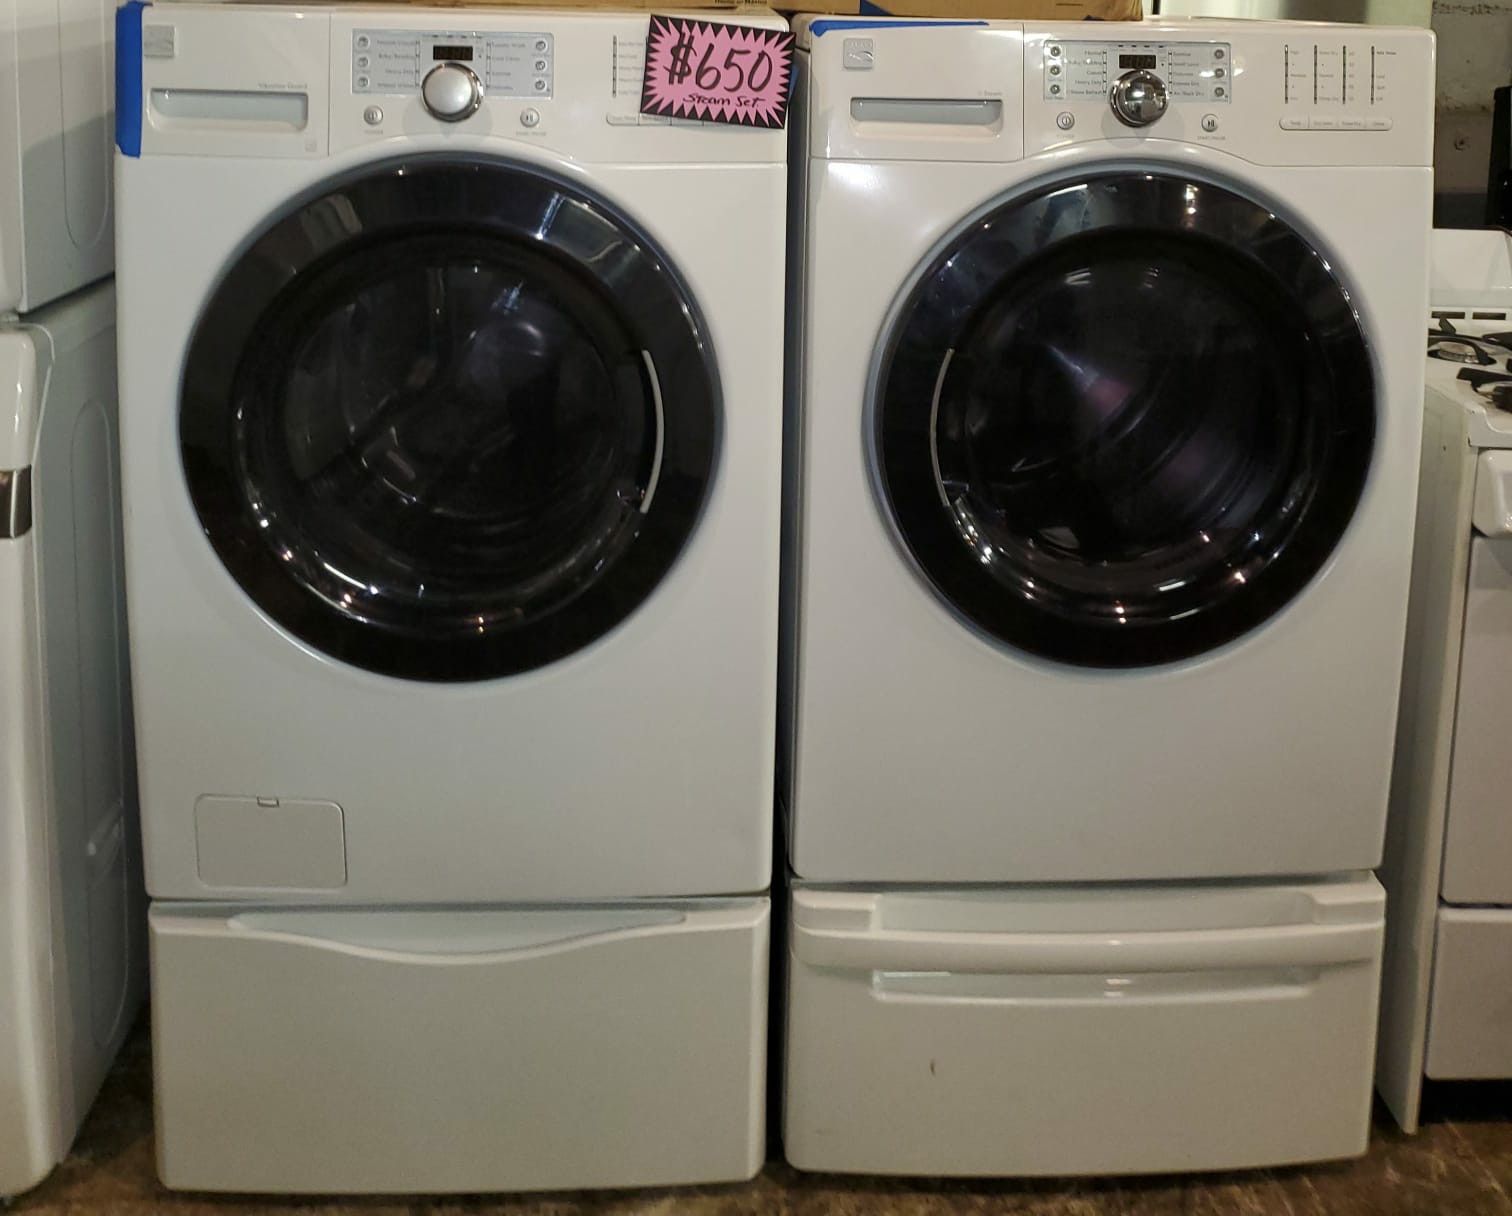 Kenmore front load washer and dryer set with pedestal working perfectly 4 months warranty